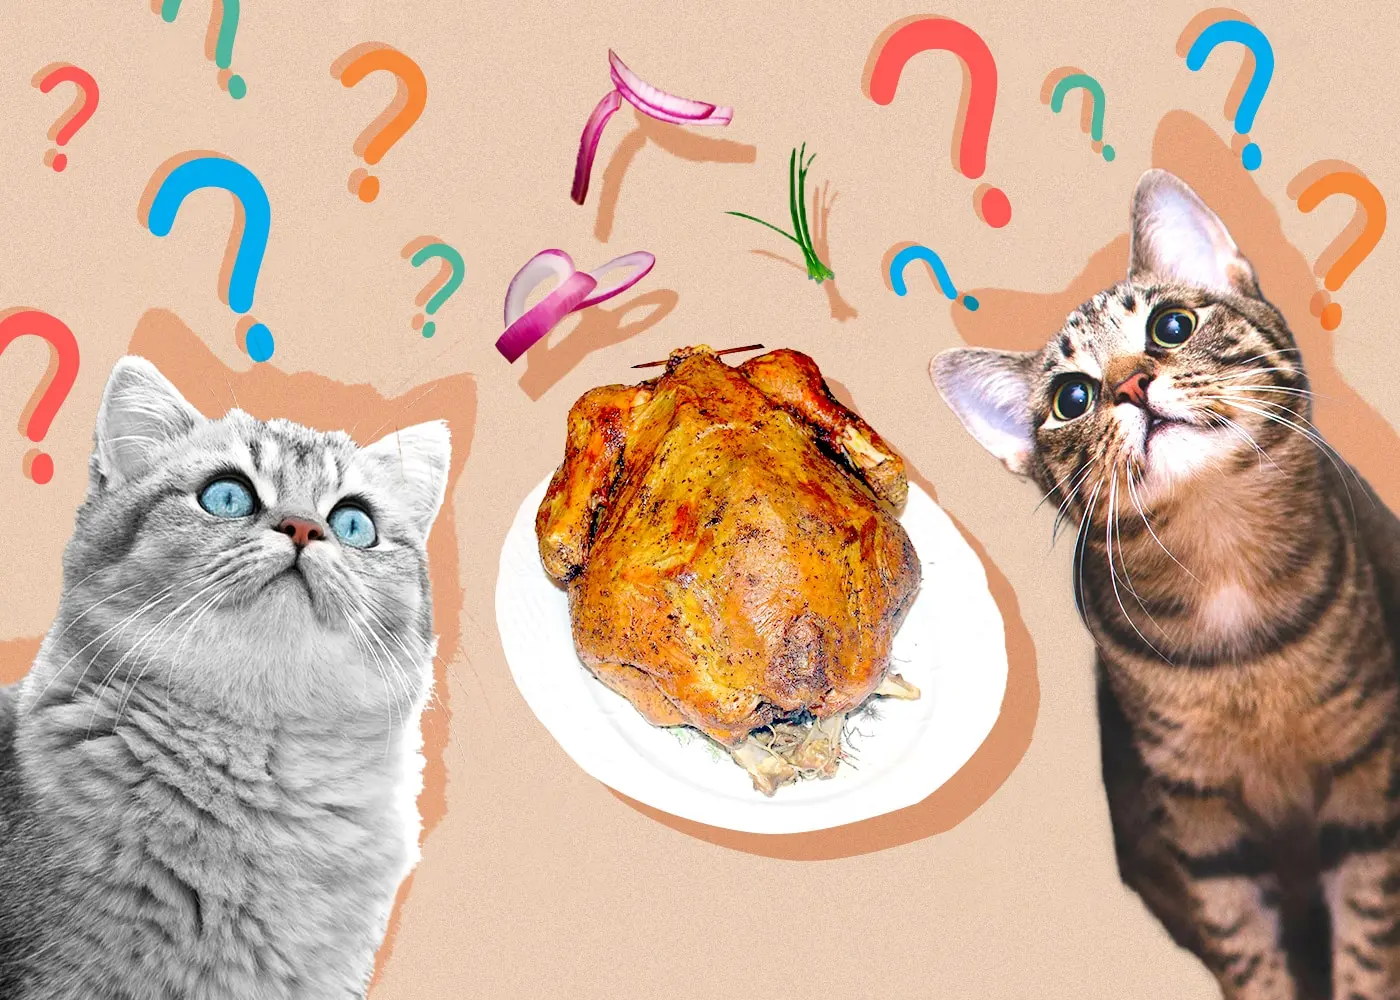 can cats eat smoked turkey - What parts of a turkey can cats eat